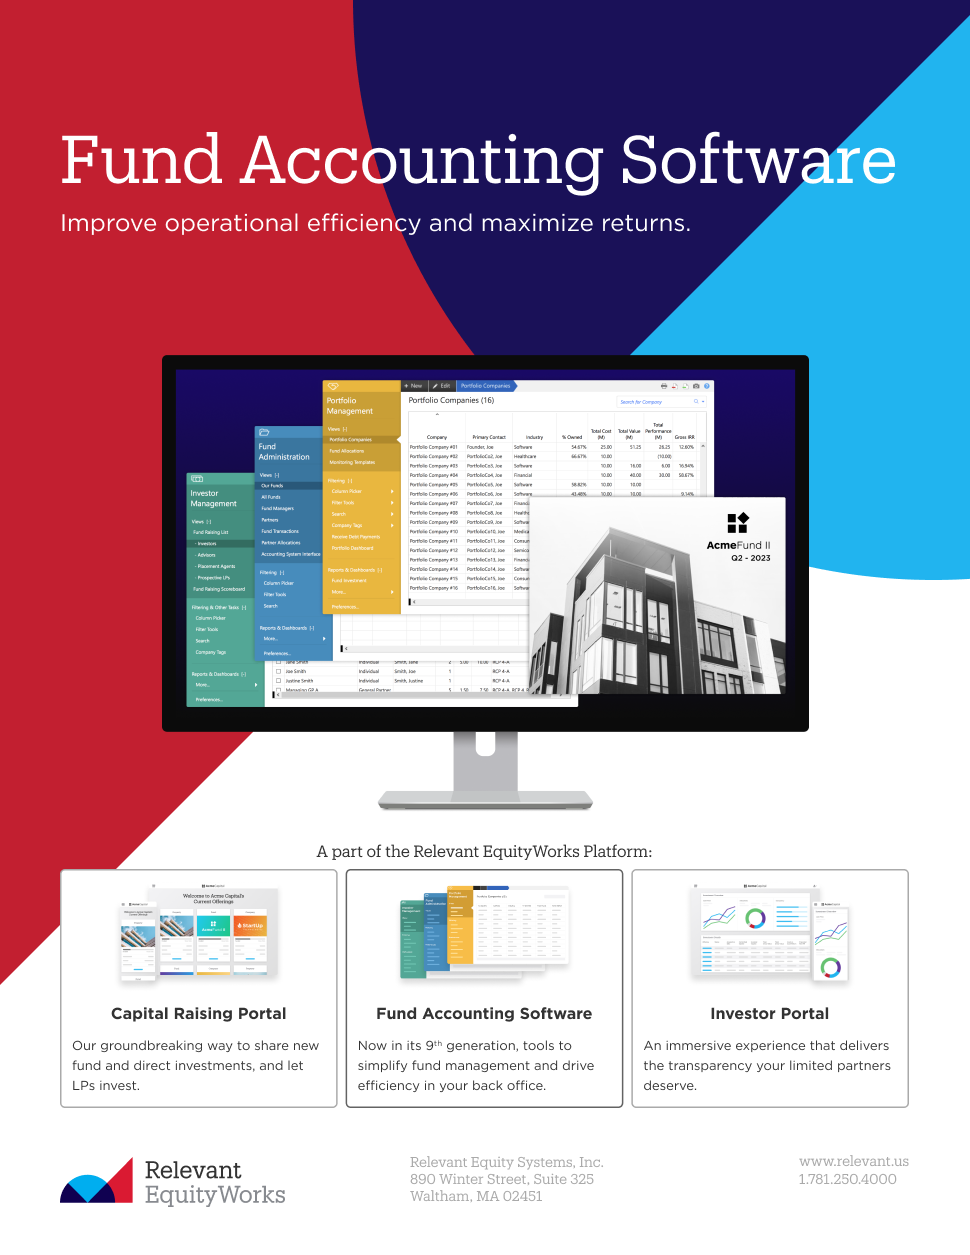 Relevant EquityWorks - Fund Accounting Software fact sheet